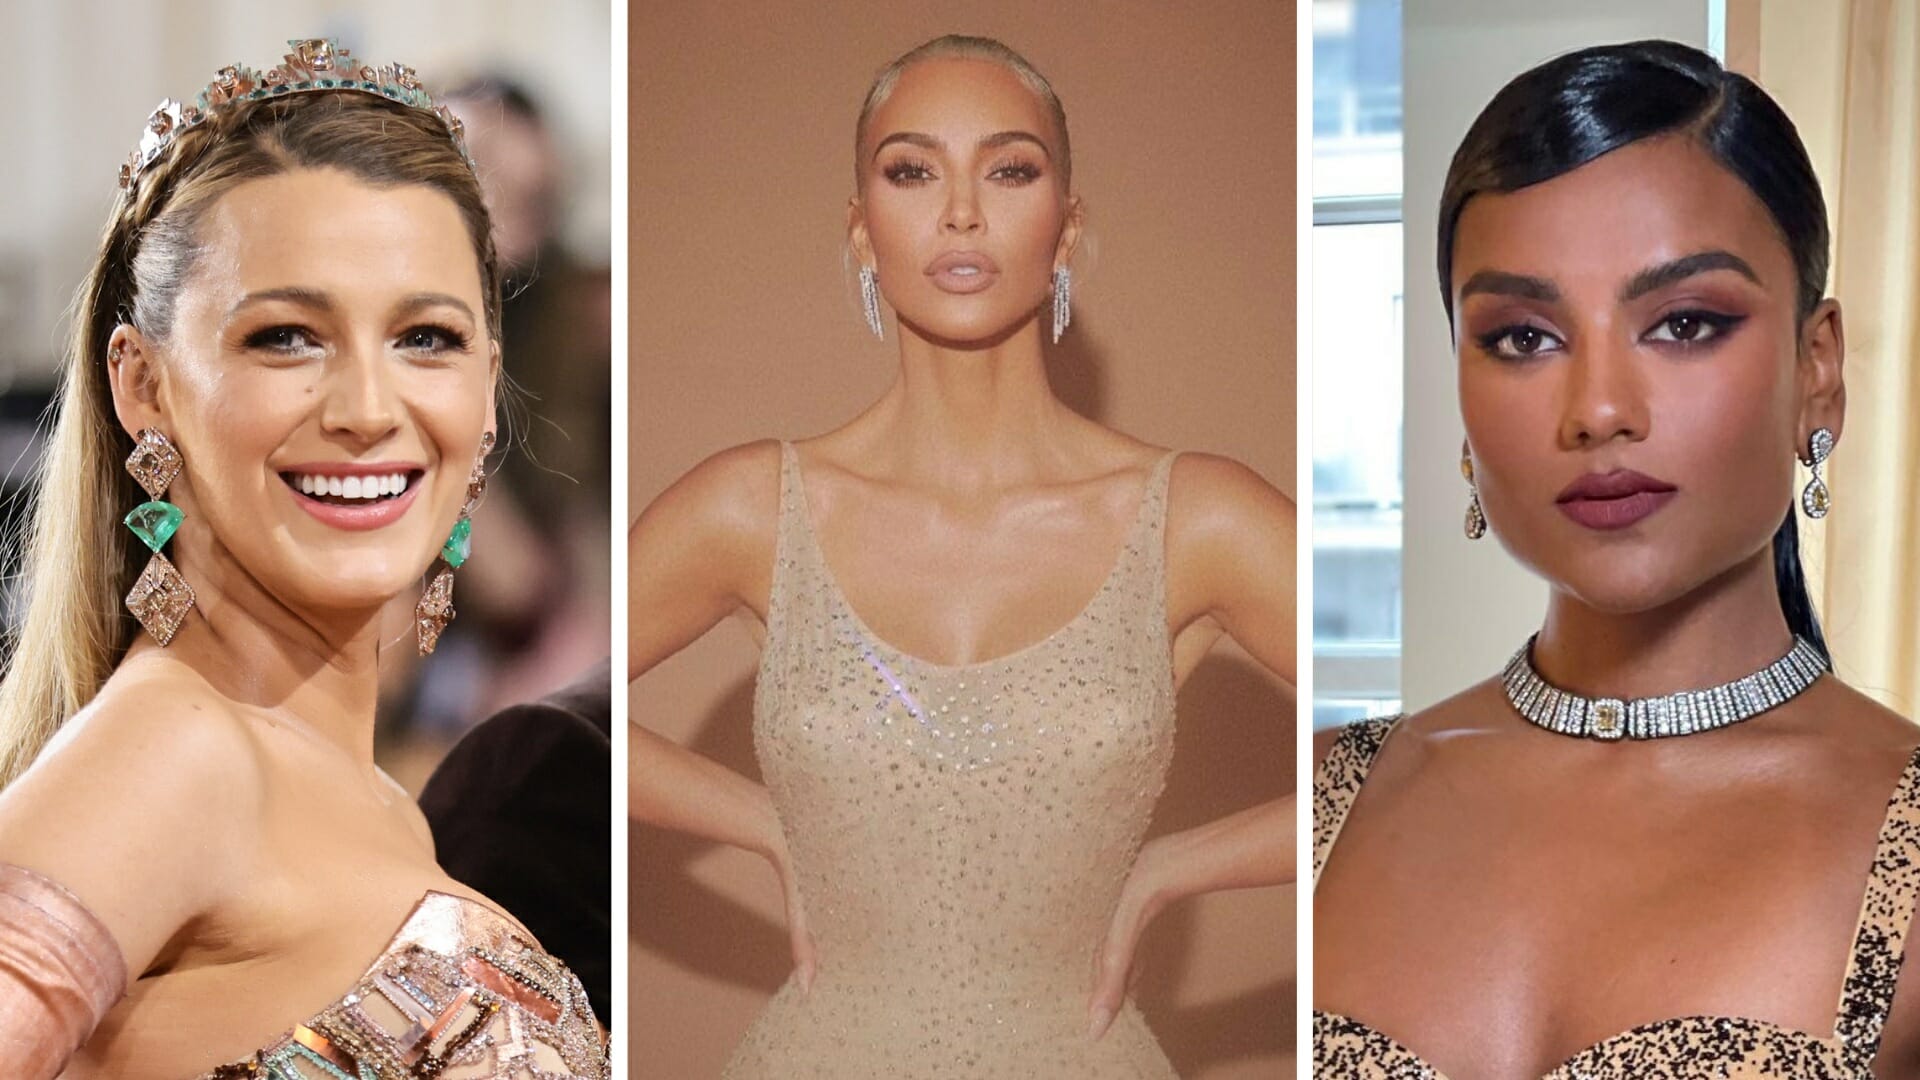 Emma Chamberlain wears Indian King's diamond necklace to Met Gala 2022;  here's why it's problematic - Entertainment News